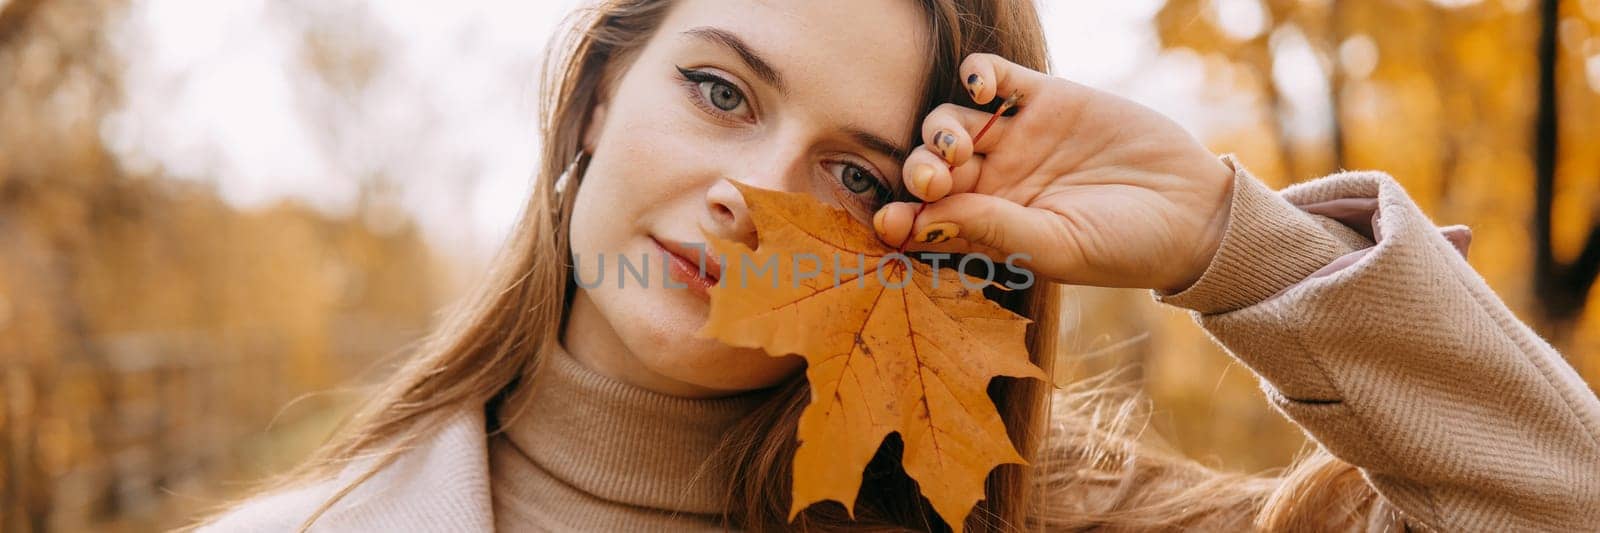 Portrait of a woman with an autumn maple leaf. Railway, autumn leaves, a young long-haired woman in a light coat coat, close-up. by Annu1tochka